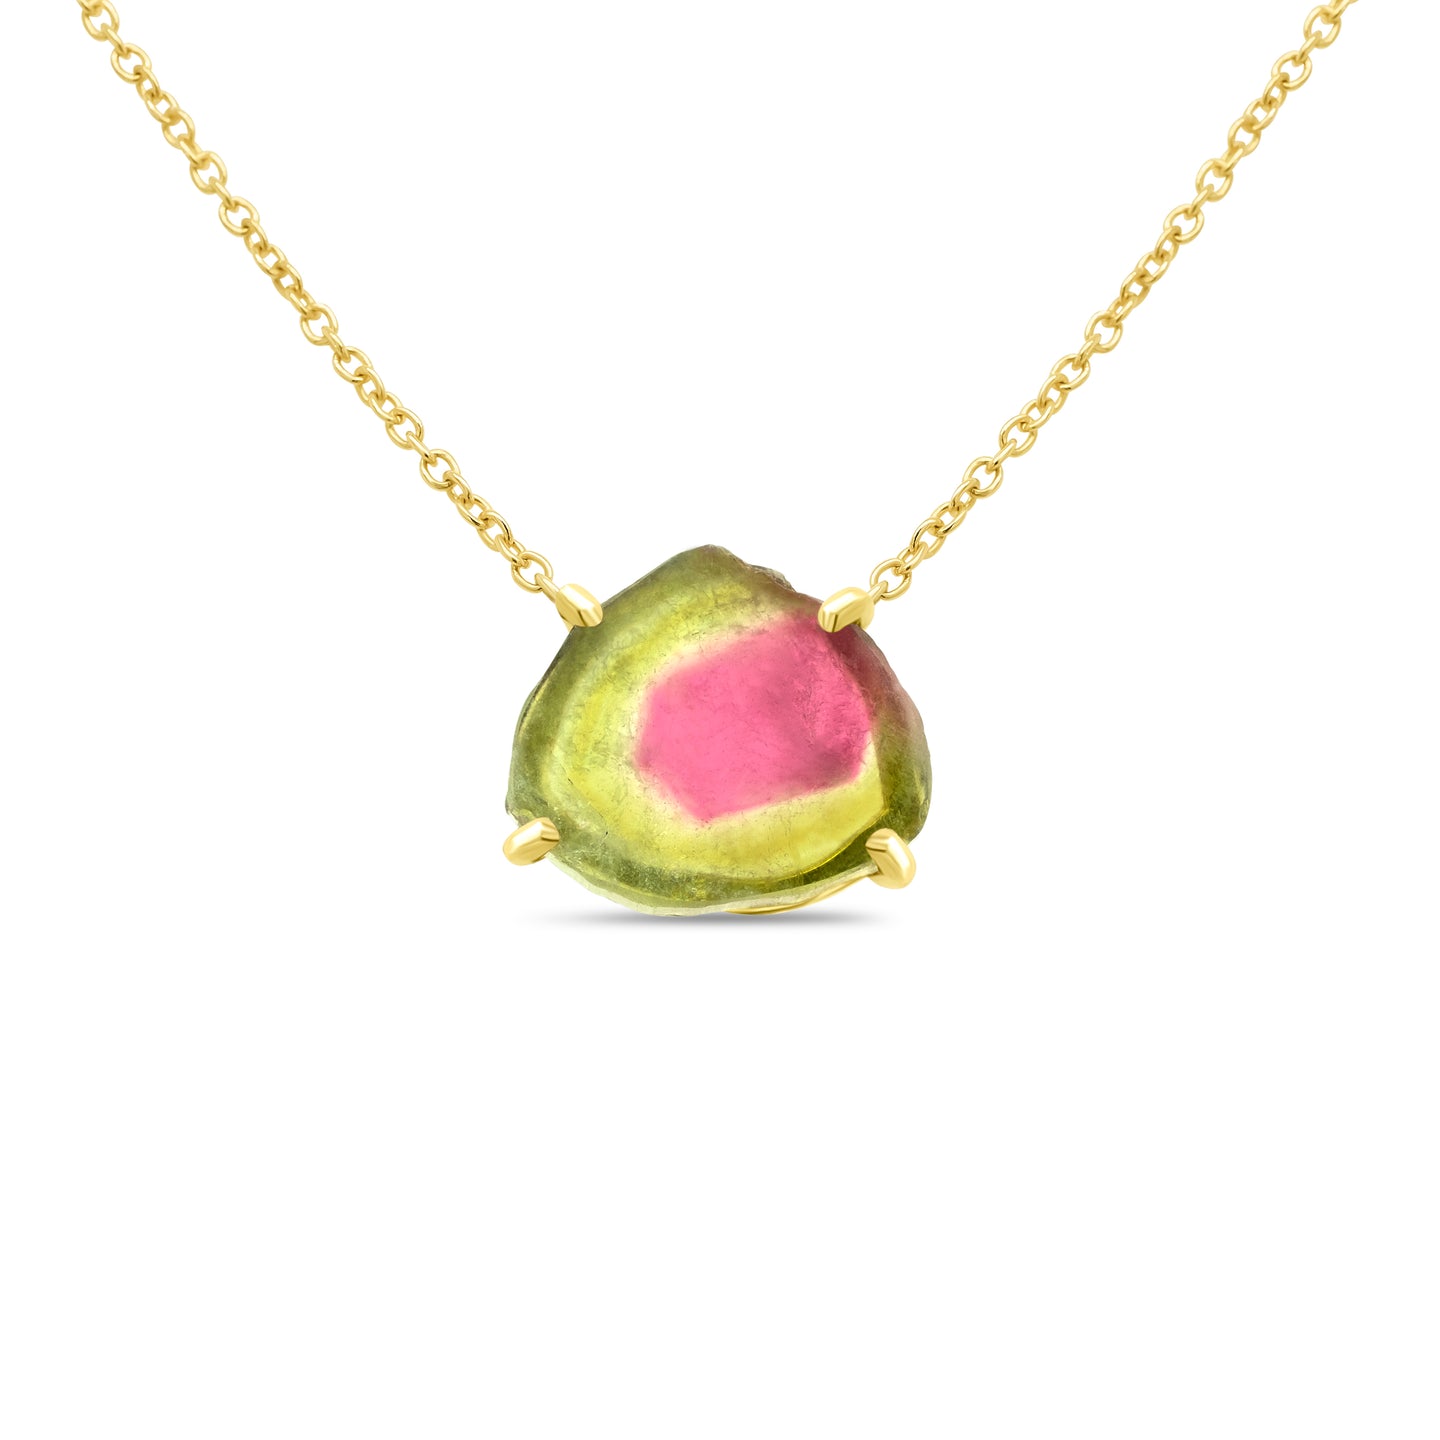 One-of-a-kind Watermelon Tourmaline Necklace